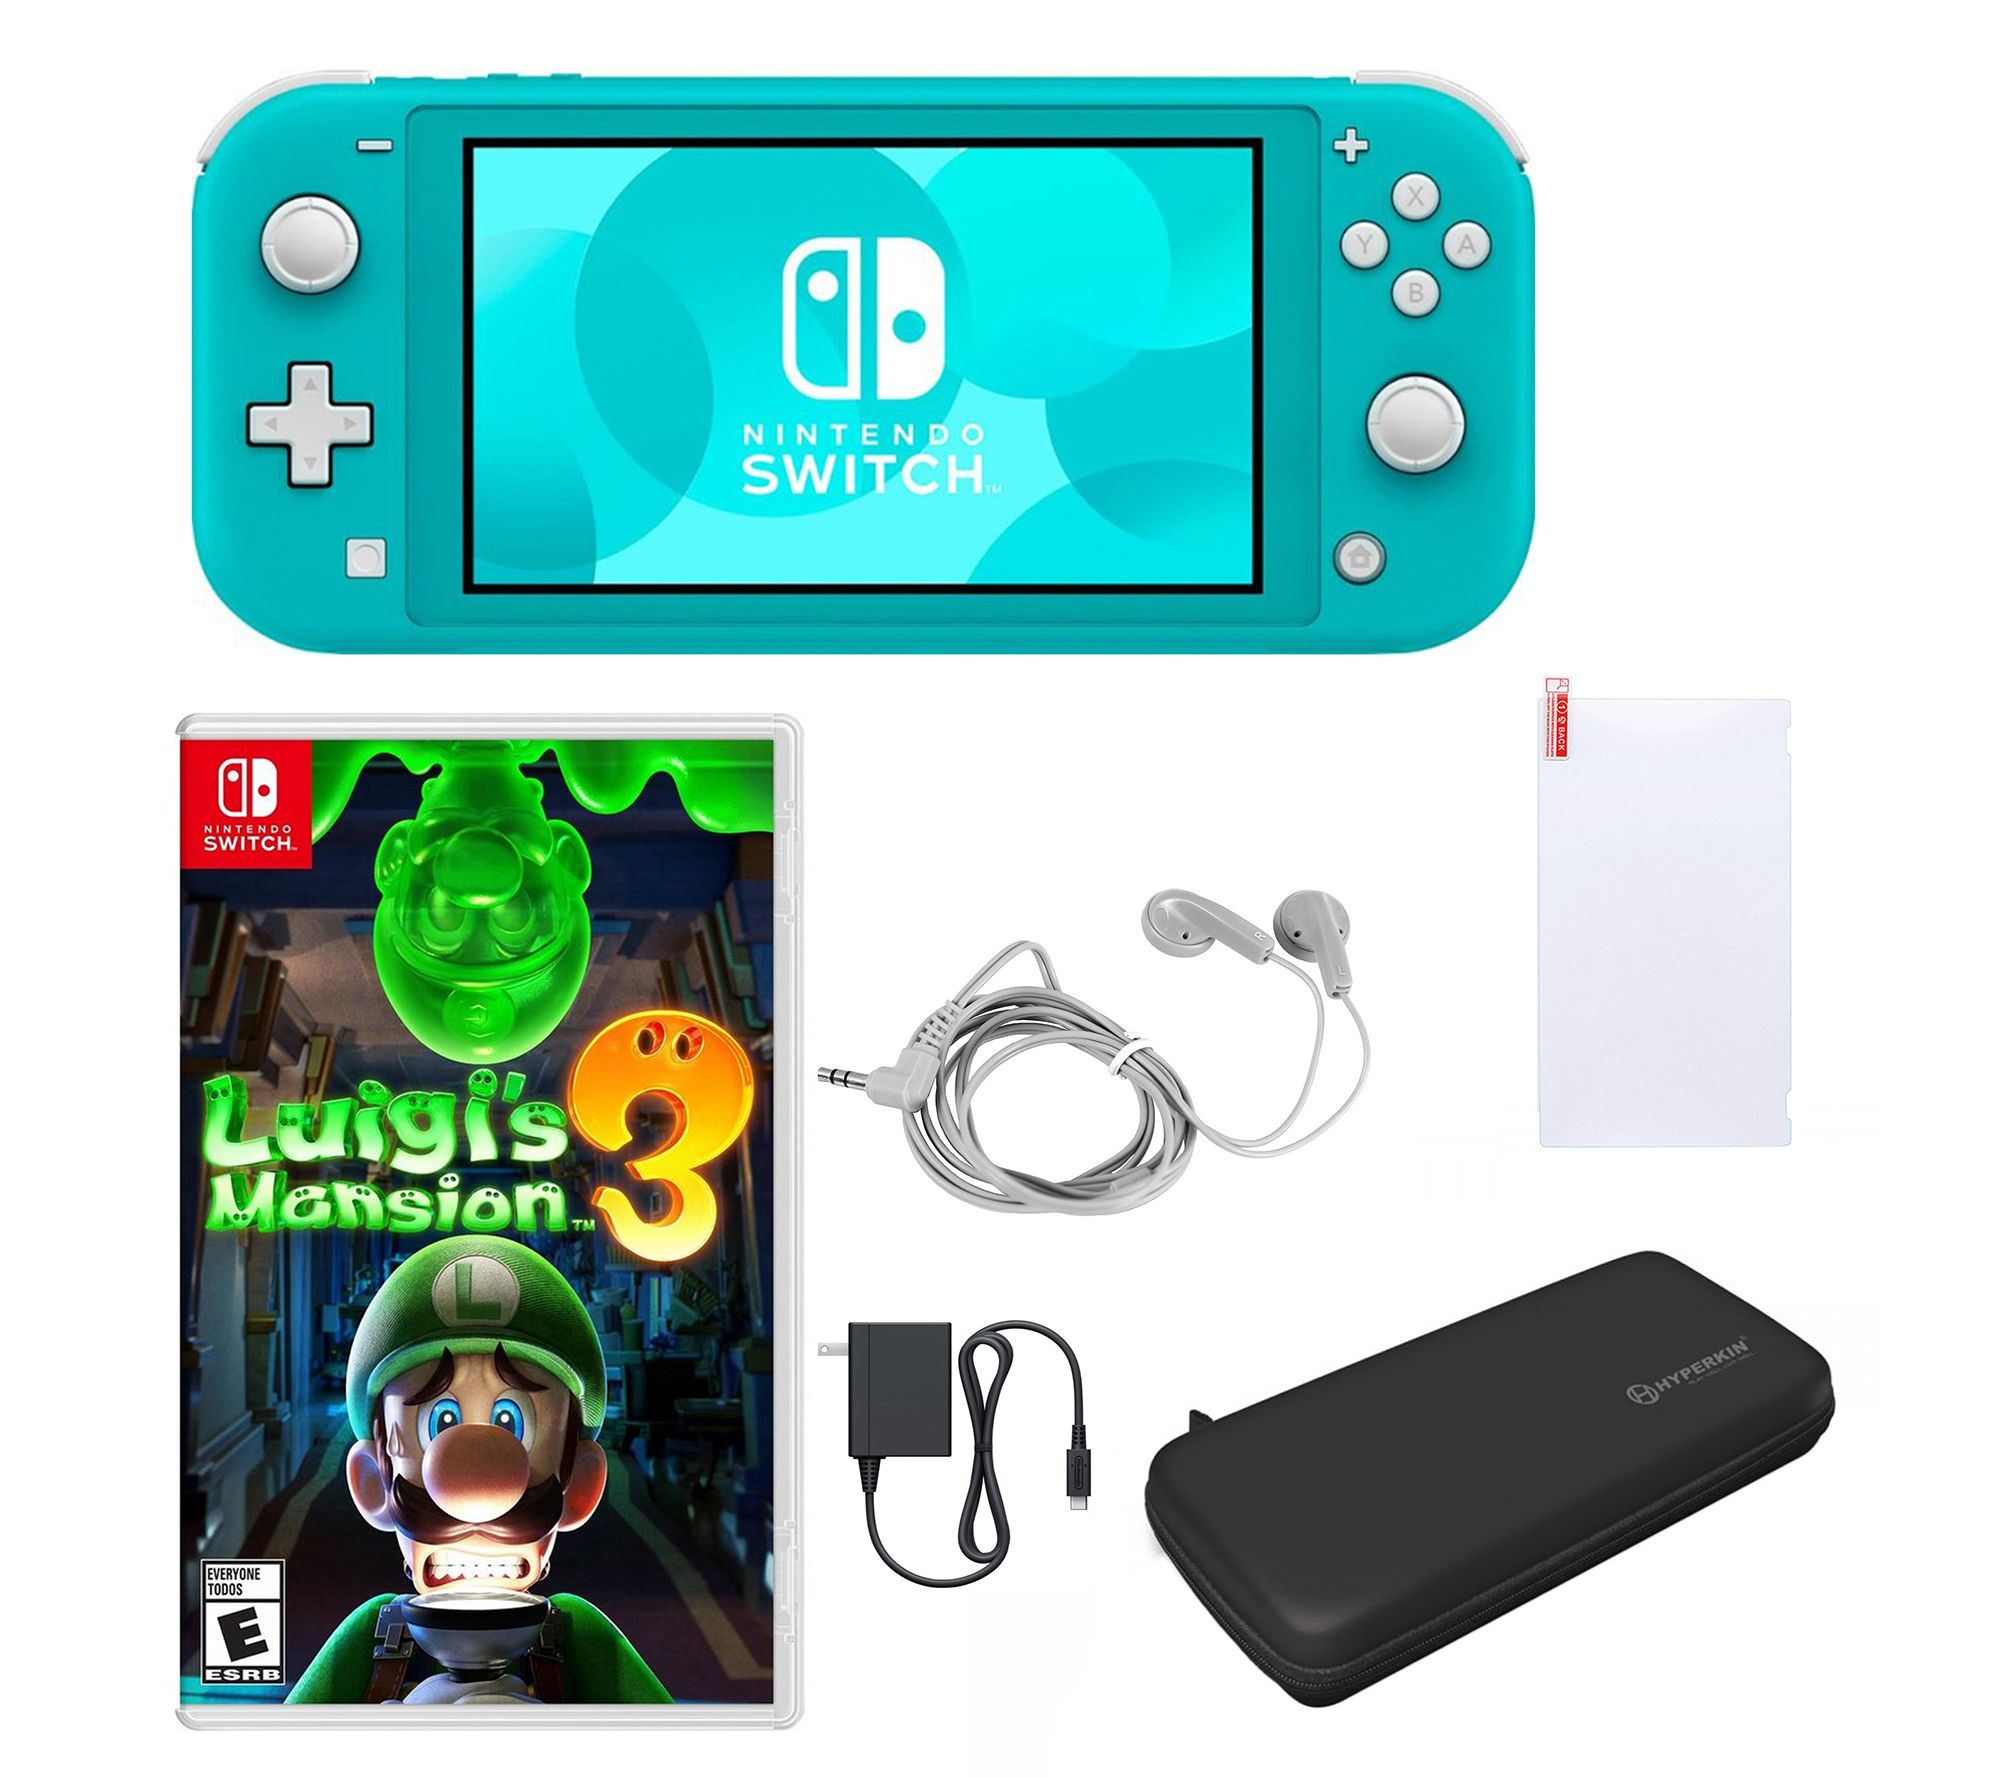 Nintendo Switch Lite with Luigi's Mansion Game and Accessories